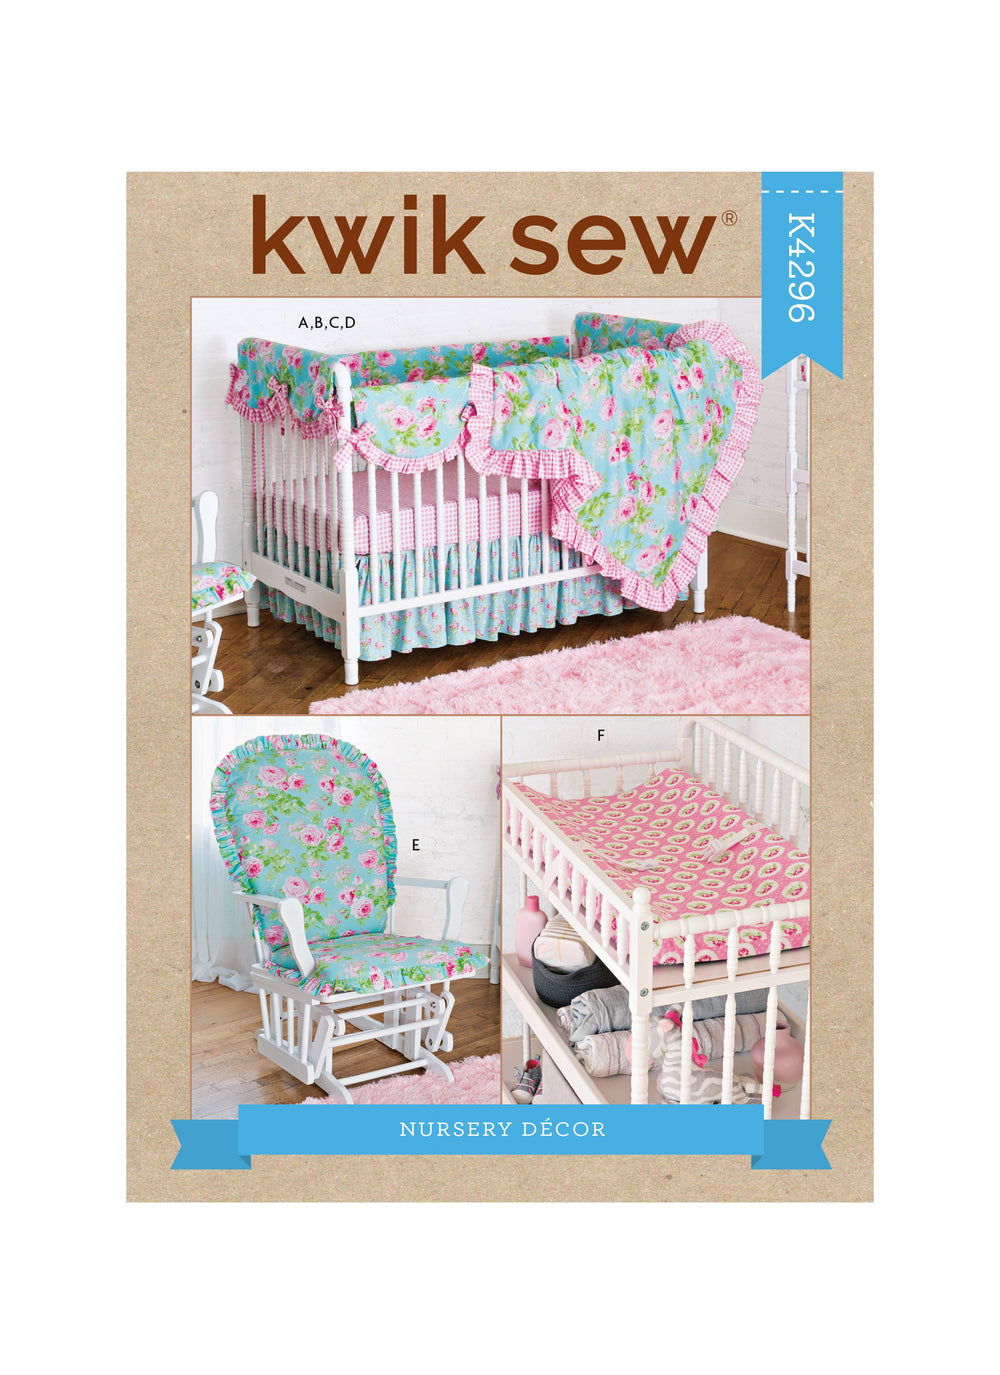 Kwik Sew 4296 Nursery Décor sewing pattern from Jaycotts Sewing Supplies